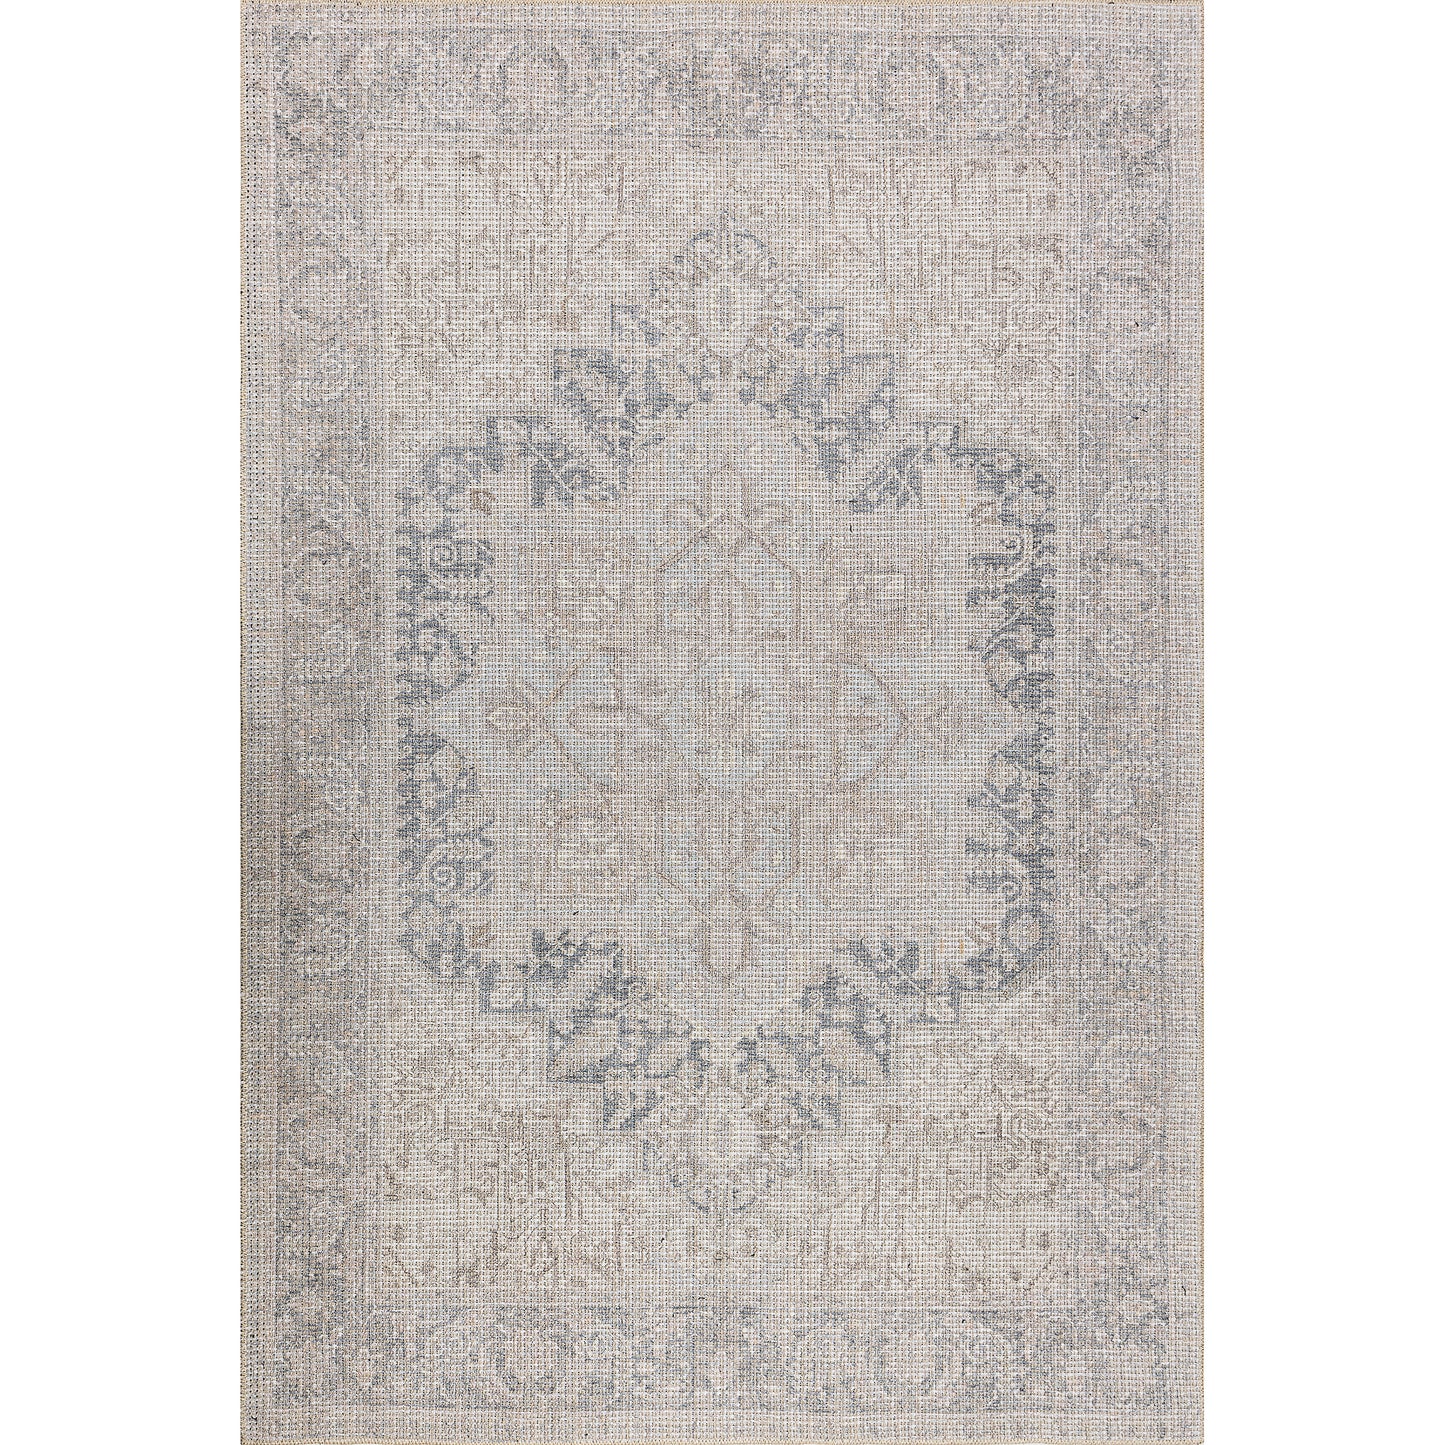 grey blue medallion cotton and polyster machine washable traditional rustic area rug 2x5, 3x5 Runner Rug, Entry Way, Entrance, Balcony, Bedside, Home Office, Table Top